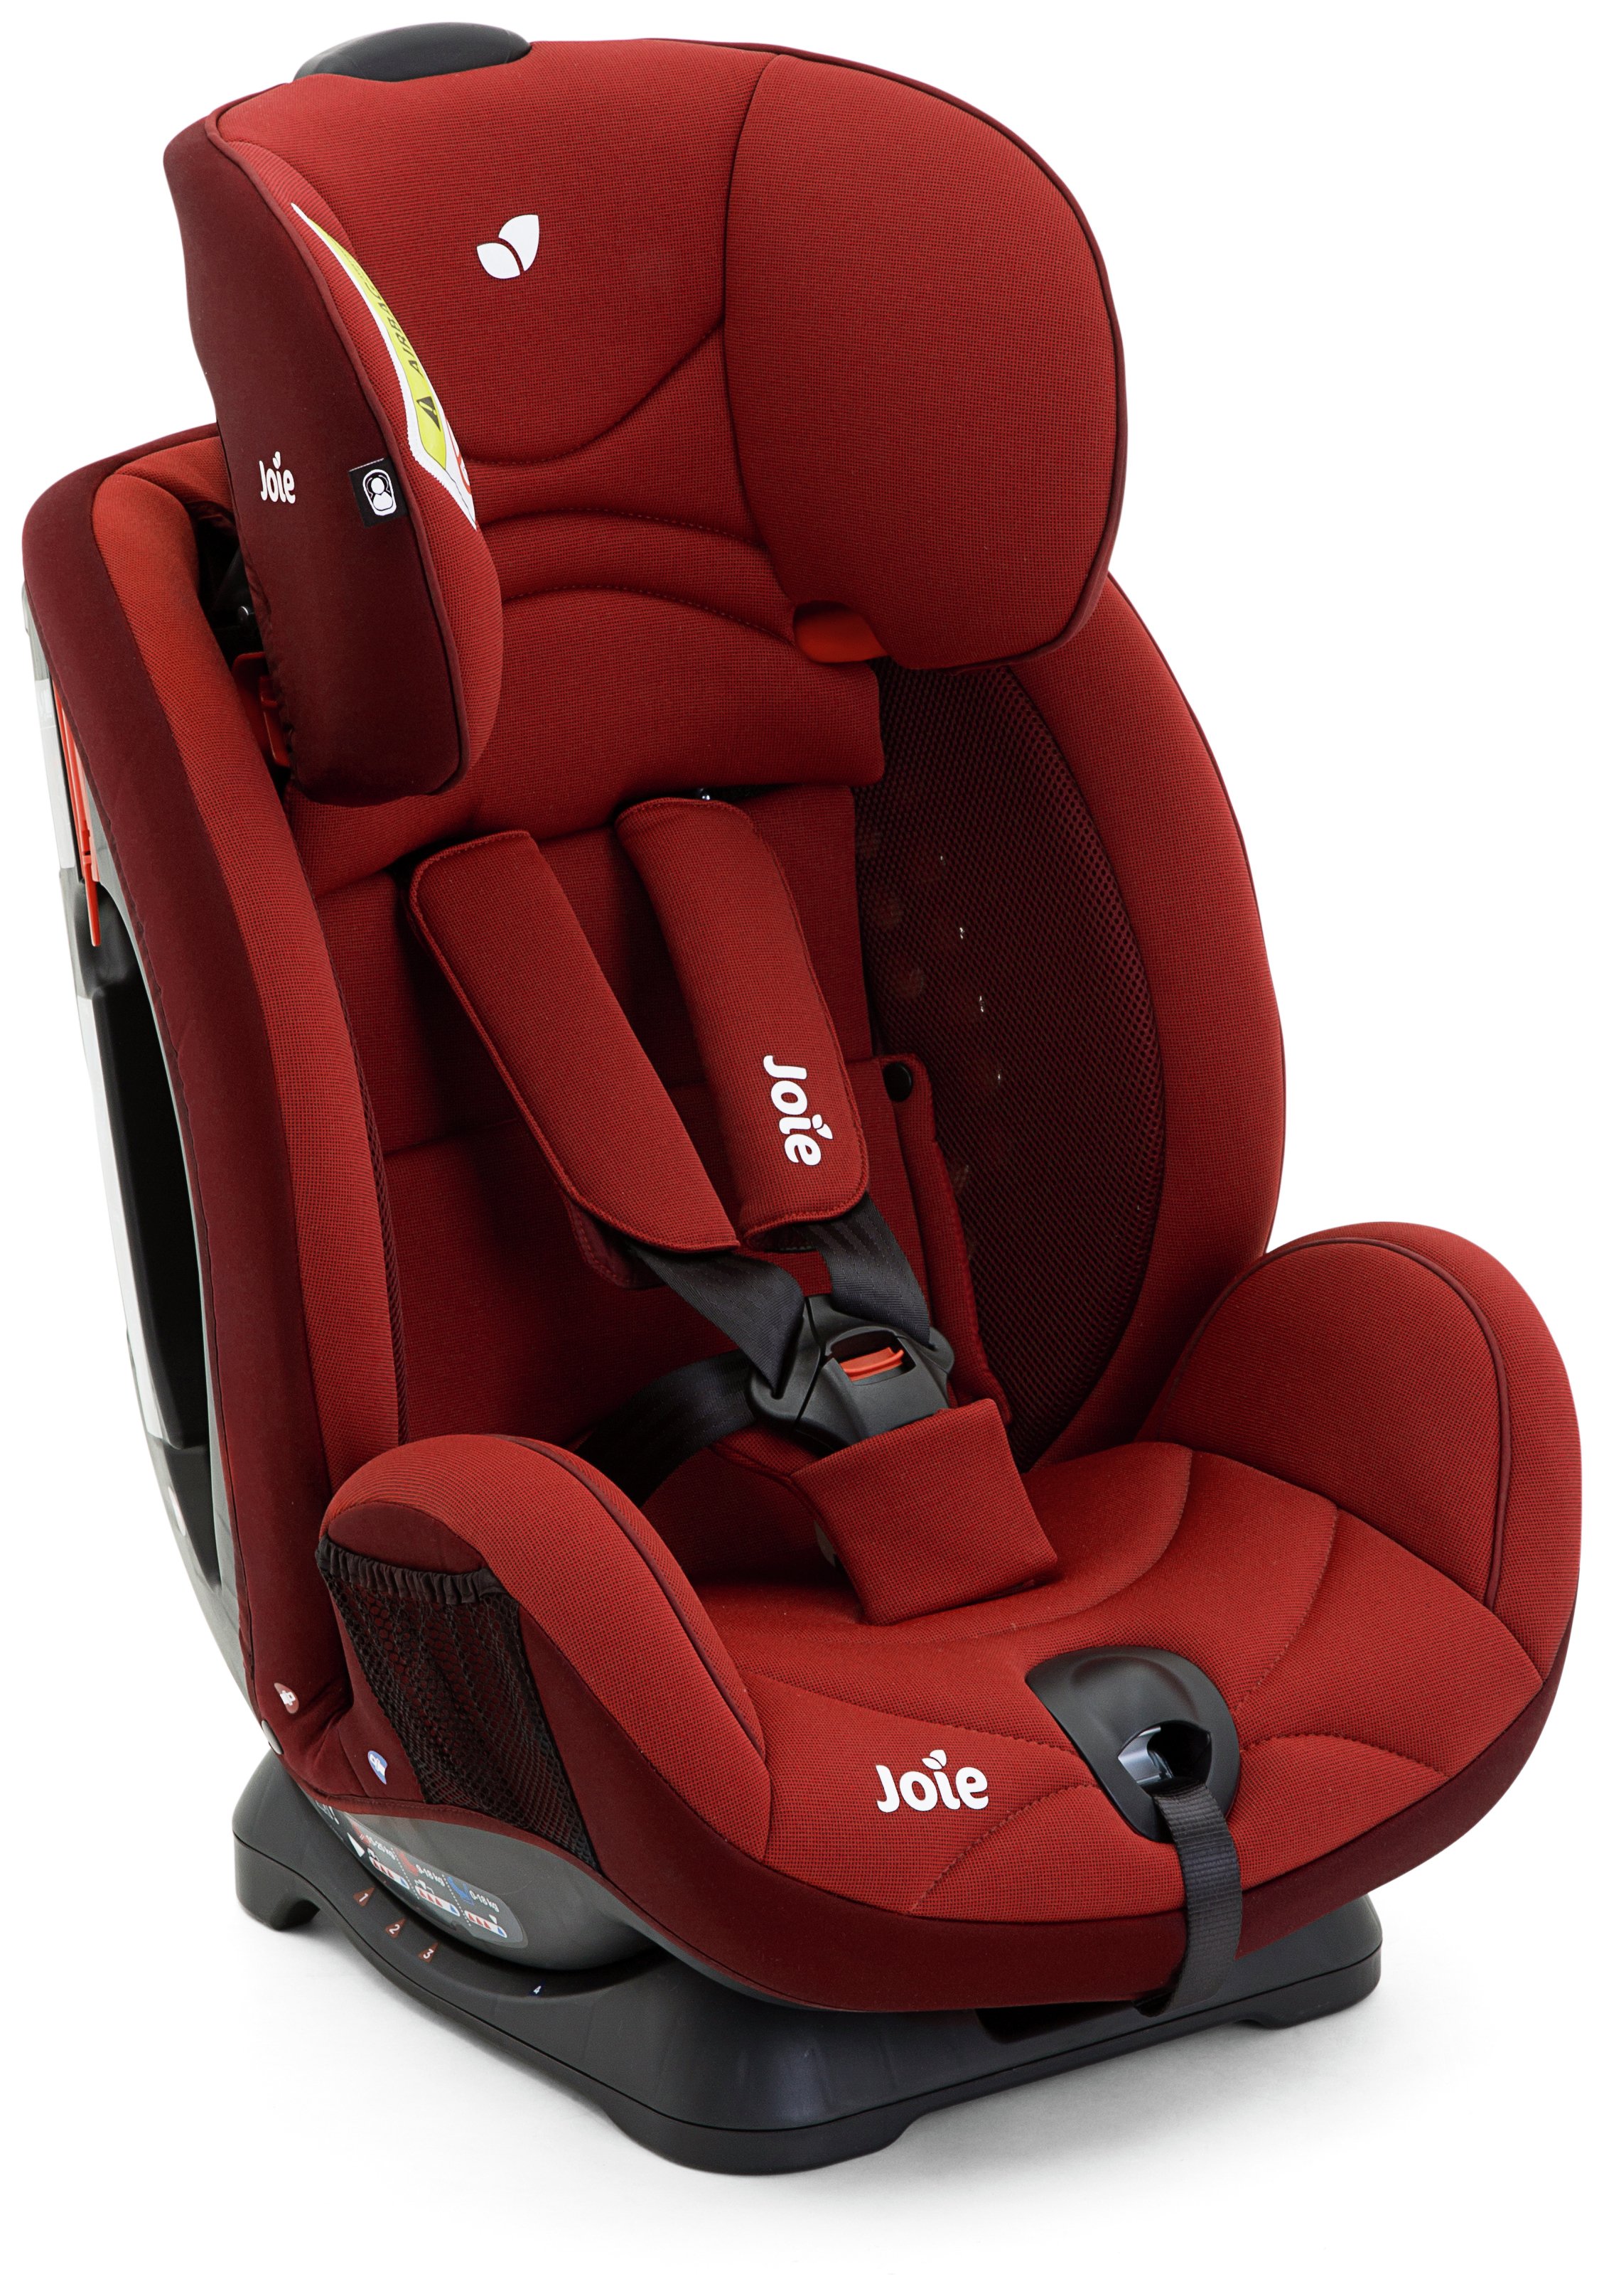 Joie Stages 0+/1/2 Car Seat Reviews